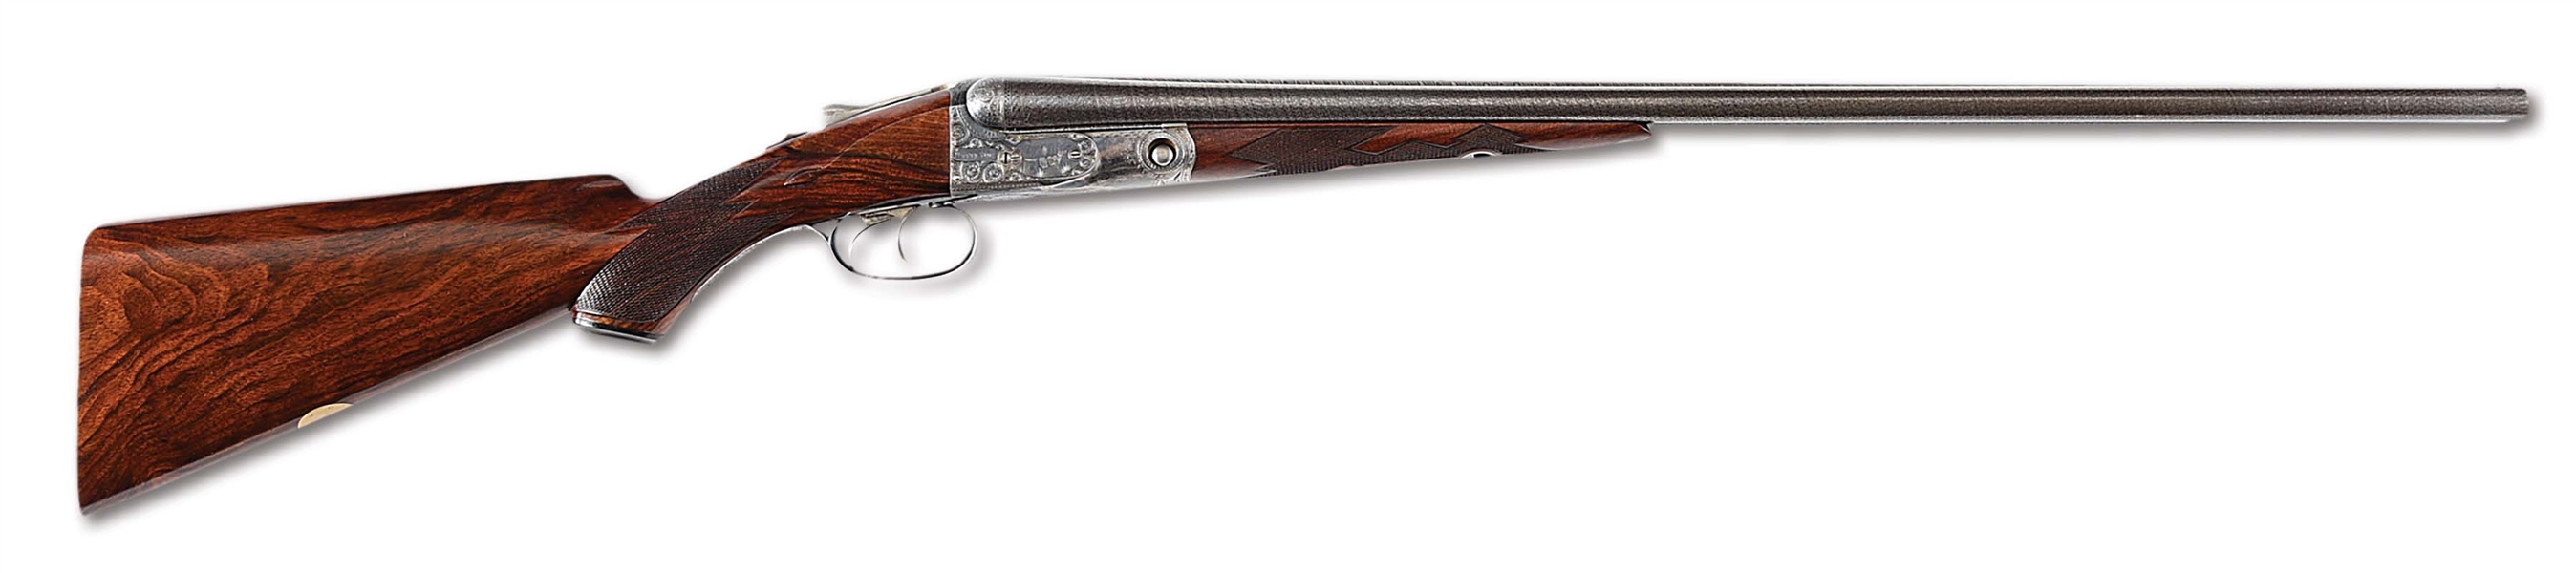 (C) EXTREMELY RARE PARKER DH 28 GAUGE SIDE BY SIDE SHOTGUN WITH FACTORY DAMASCUS BARRELS.